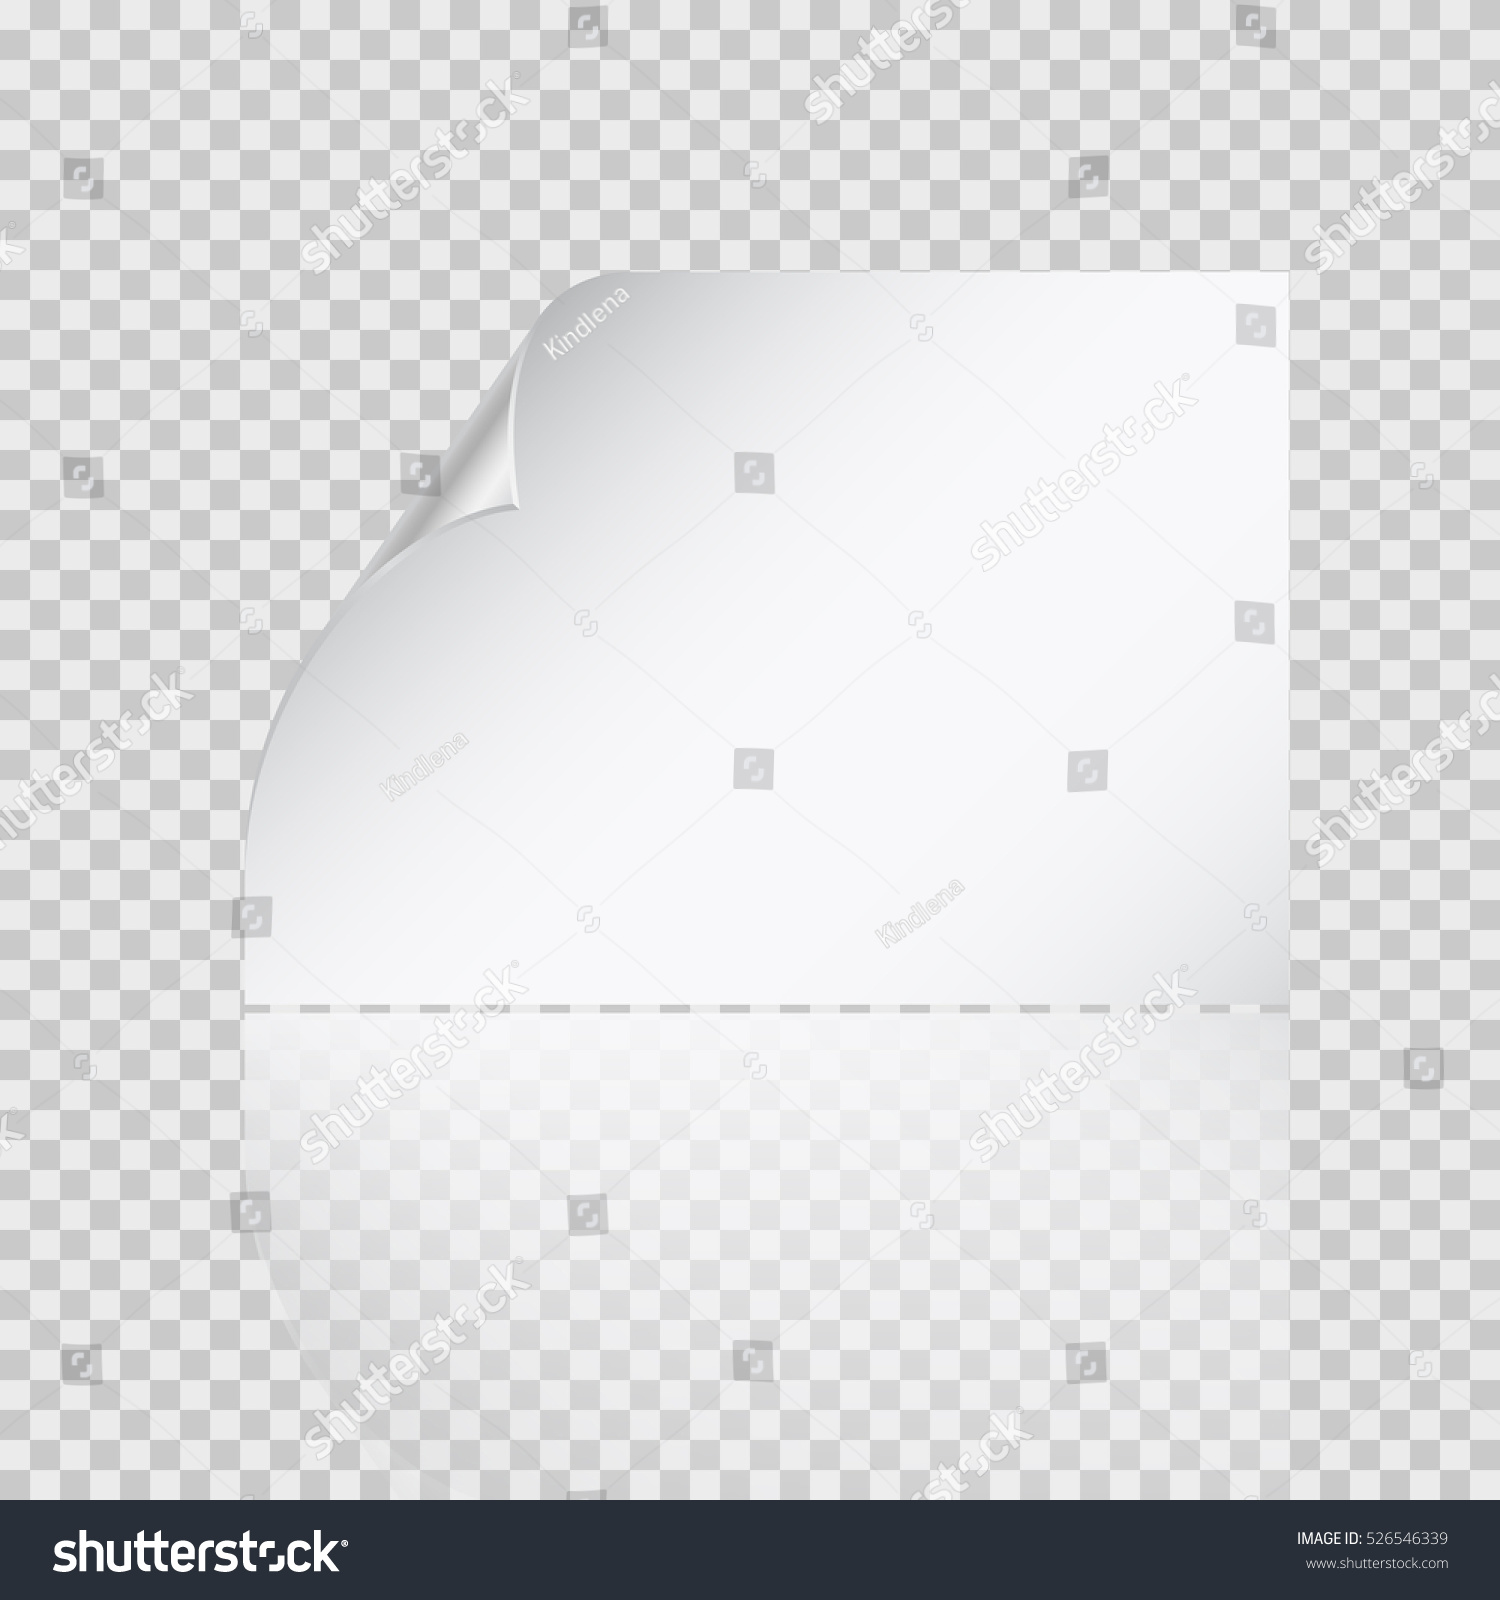 Silver Page Curl Corner On Blank Stock Vector 526546339 - Shutterstock